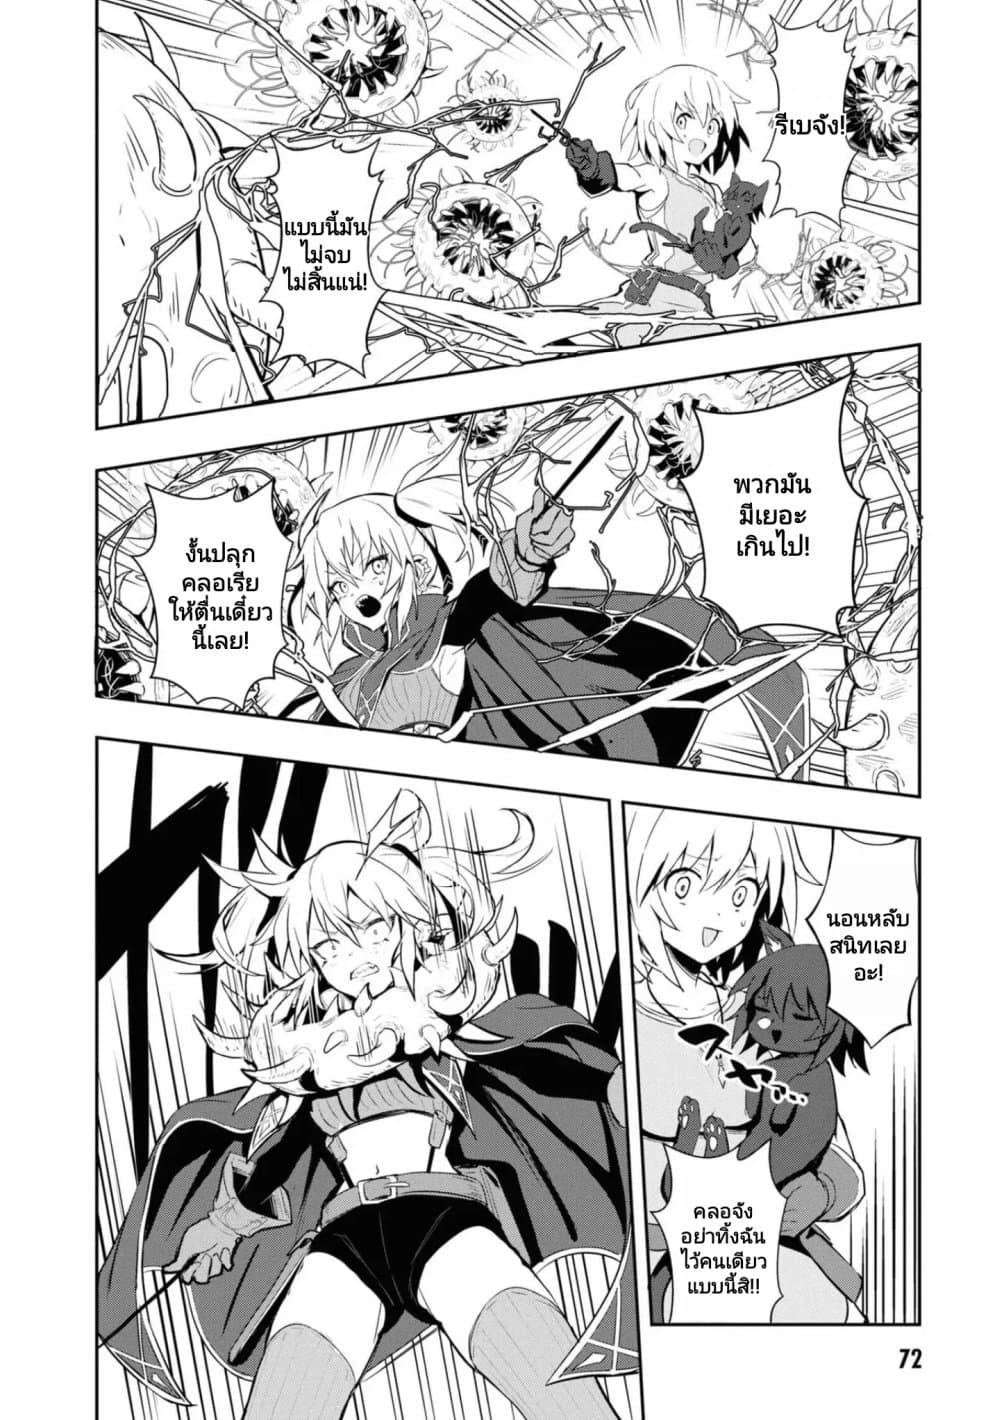 Witch Guild Fantasia 8 06